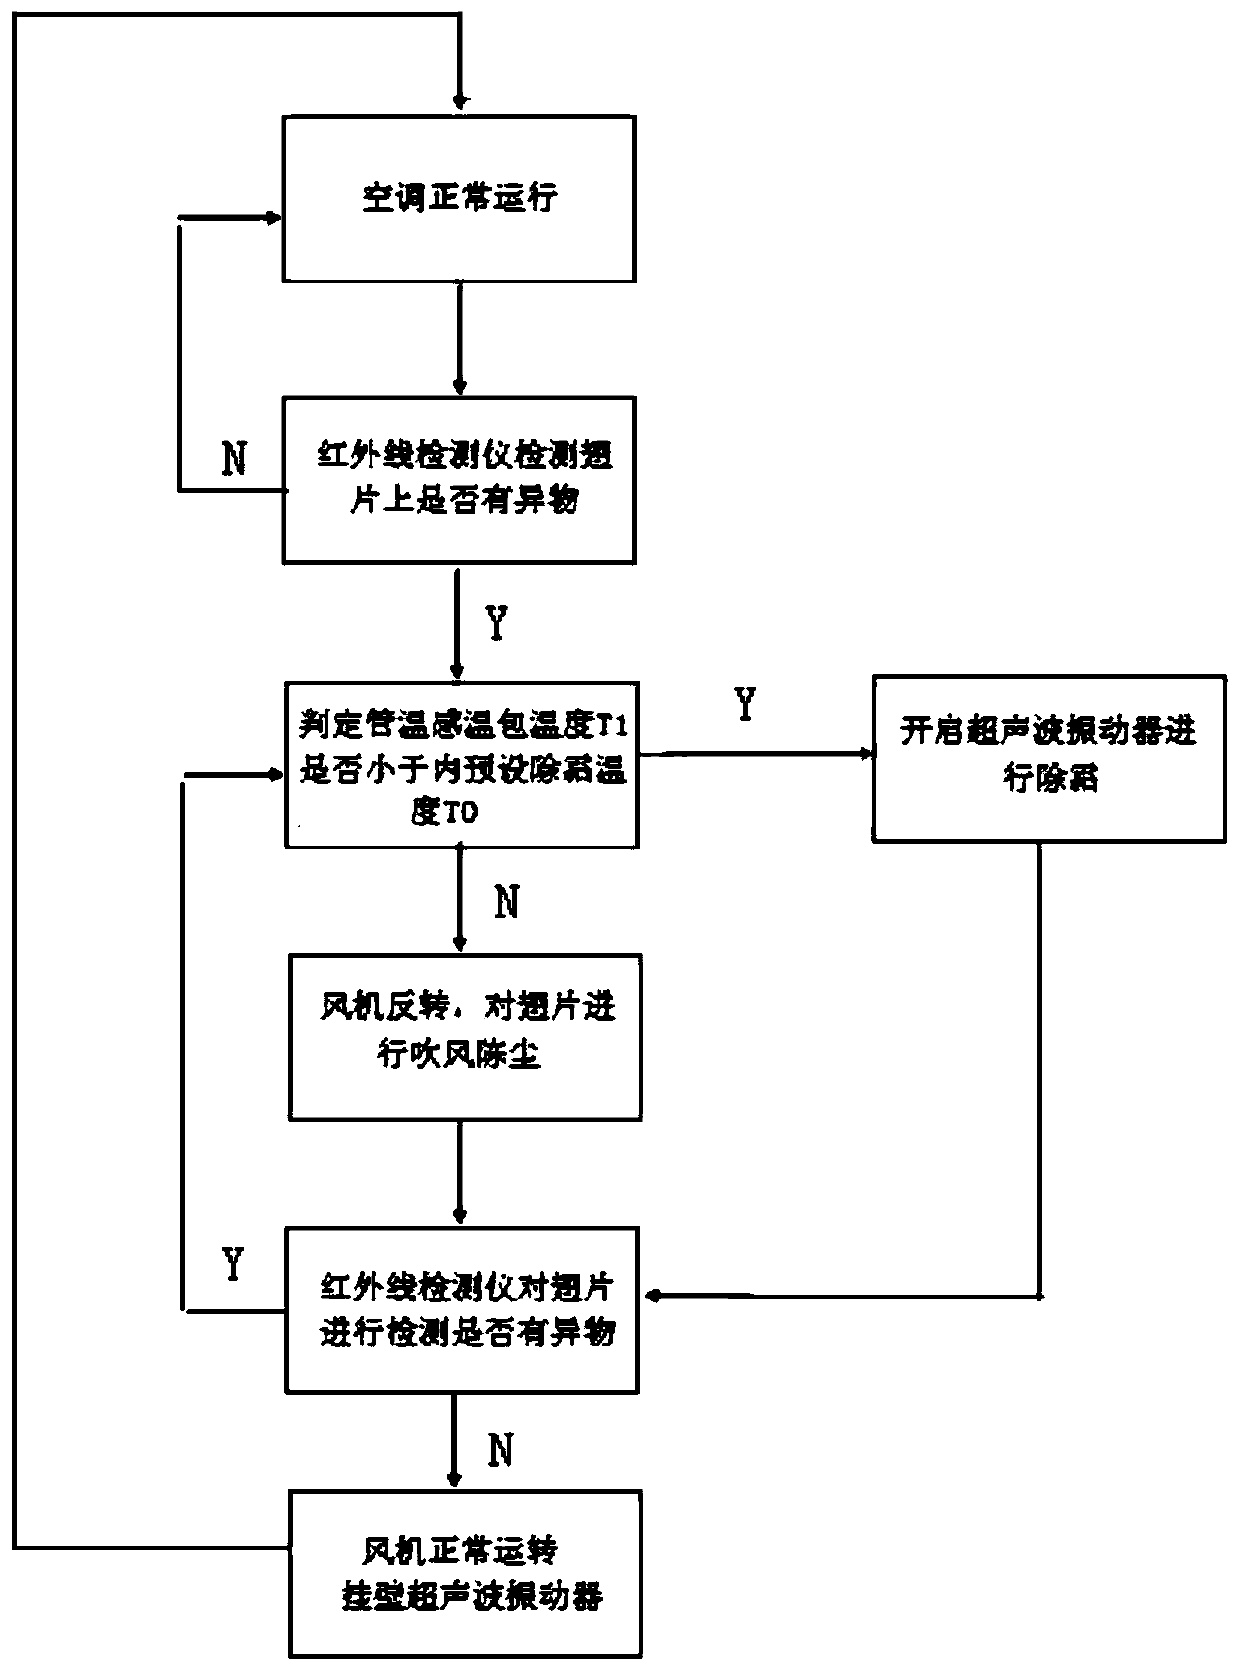 Air conditioner defrosting and dust removing method and air conditioner defrosting method